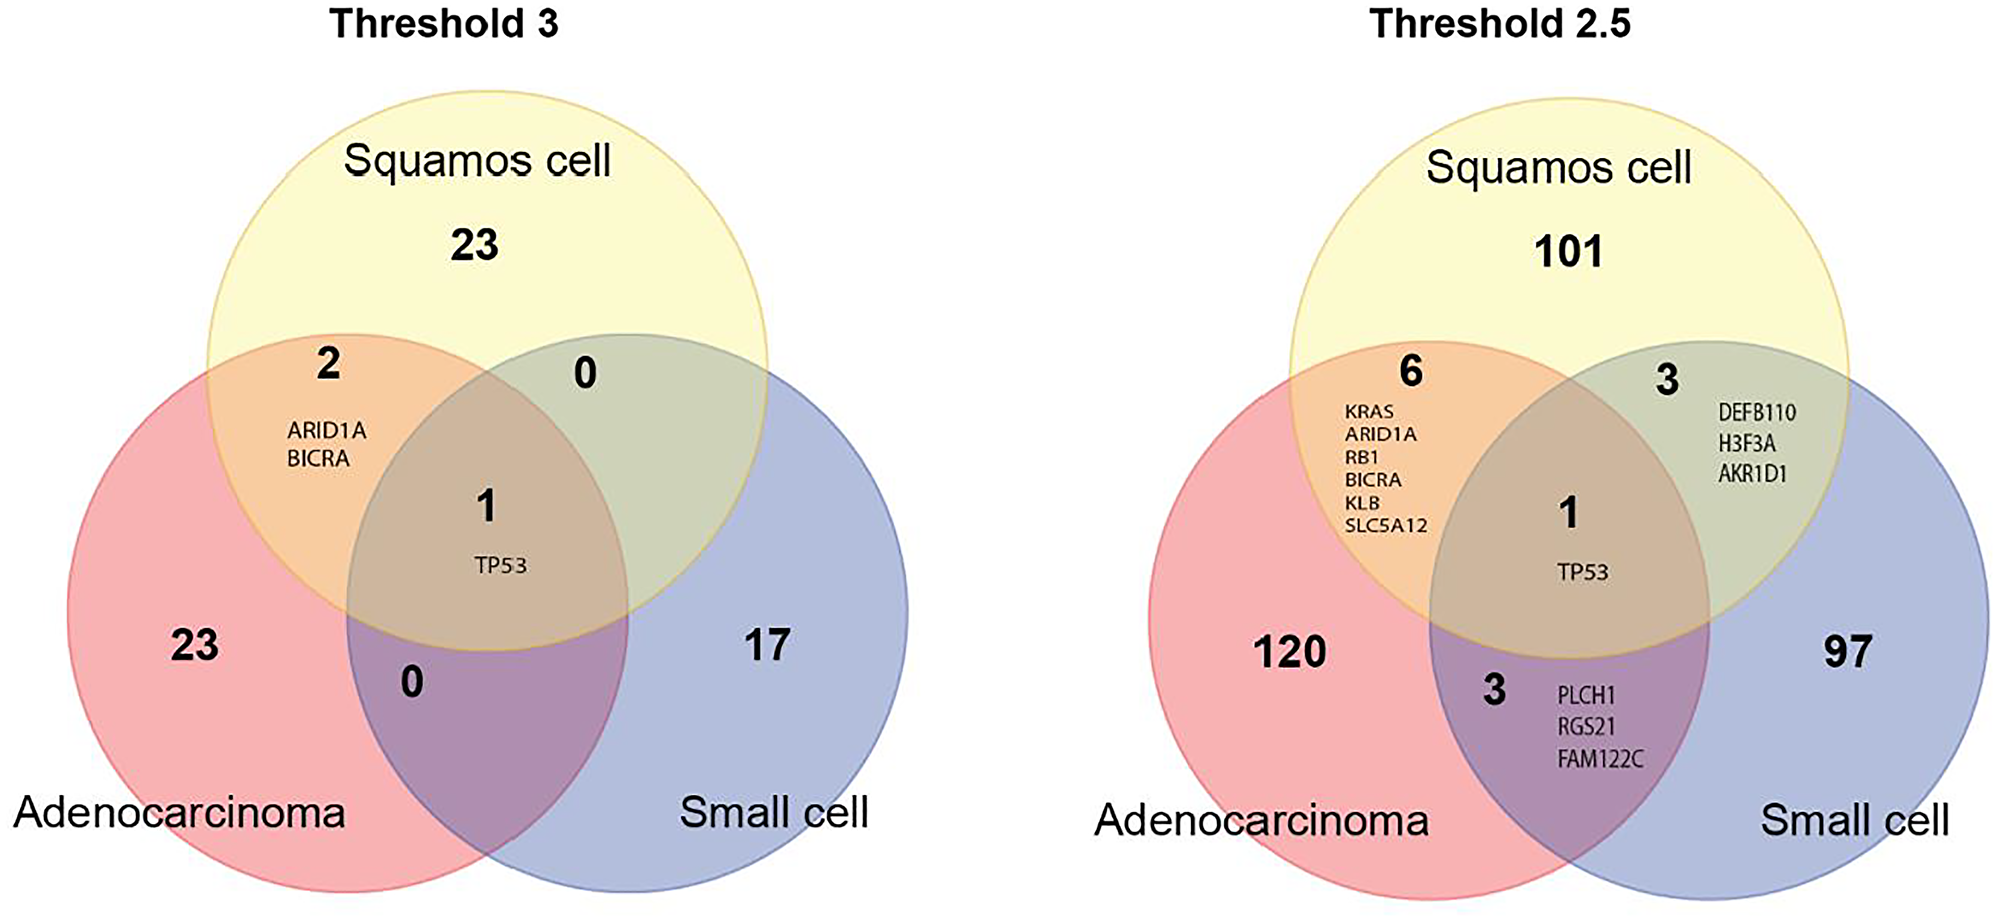 Venn diagram of candidate genes for the three major lung cancer cell types identified using the very strict threshold of 3 (left panel) and a more liberal threshold of 2.5 (right panel).